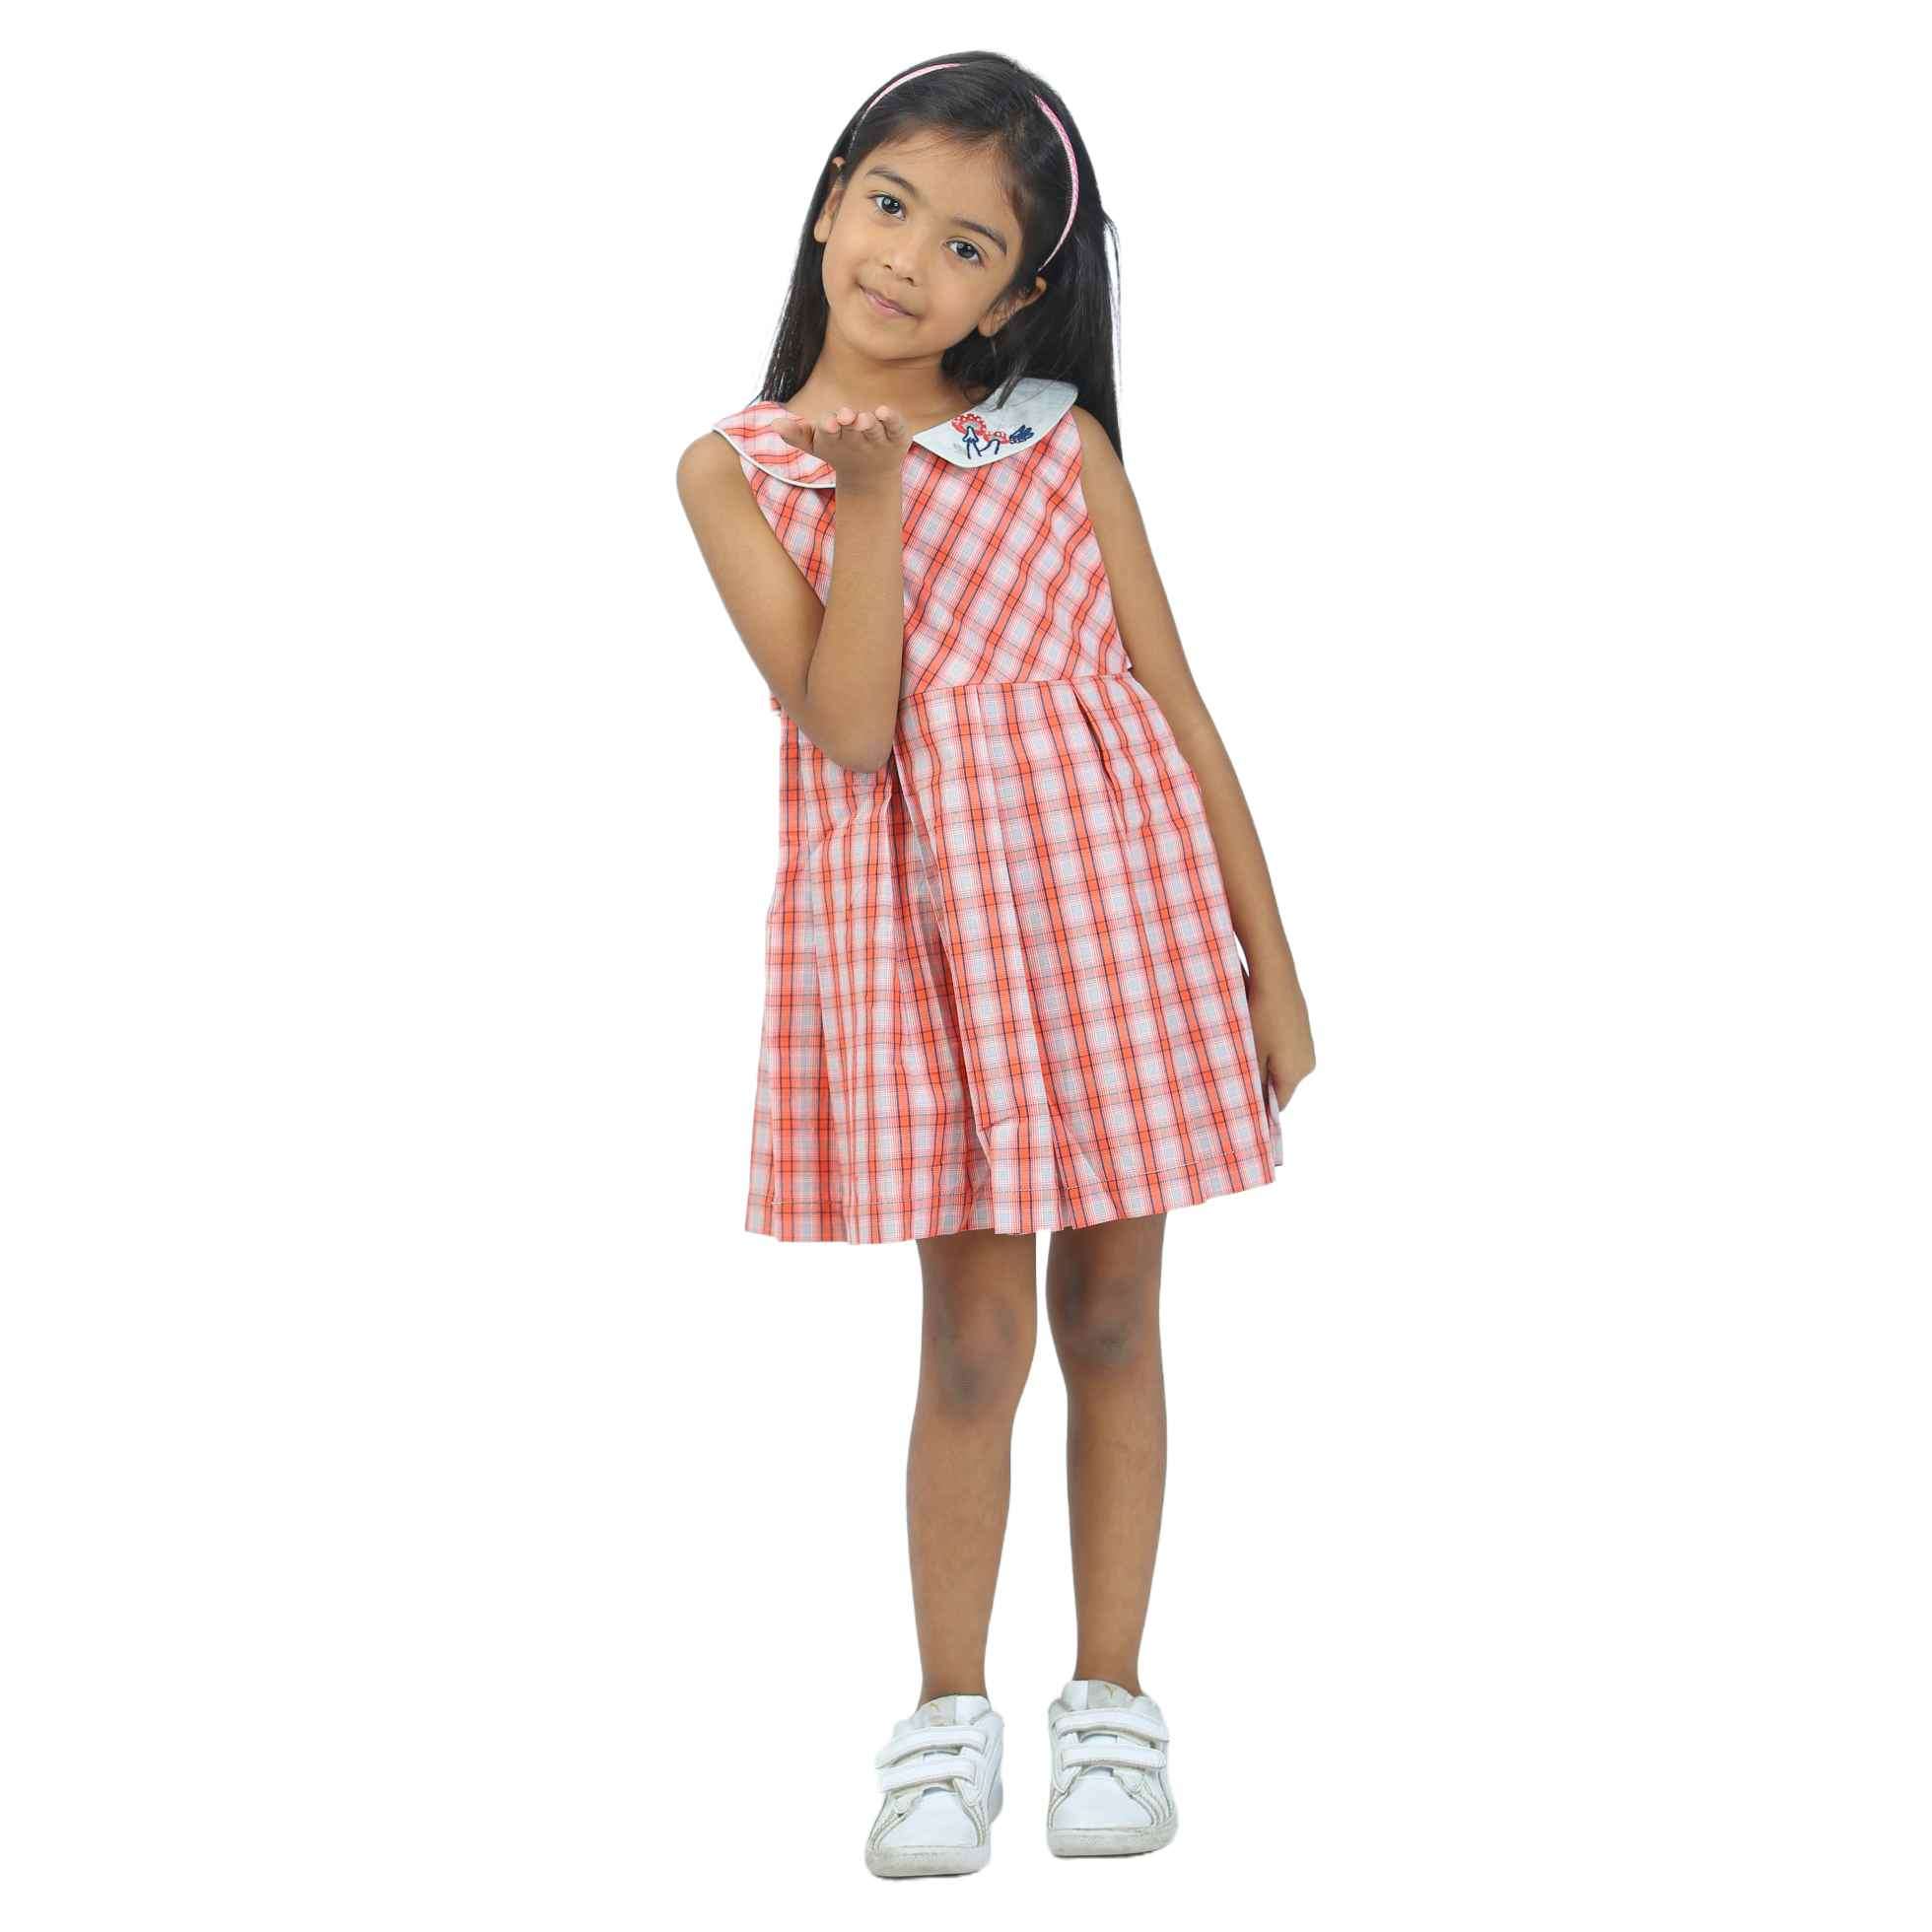 Girl wearing a red and ivory plaid casual dress with collar embroidery